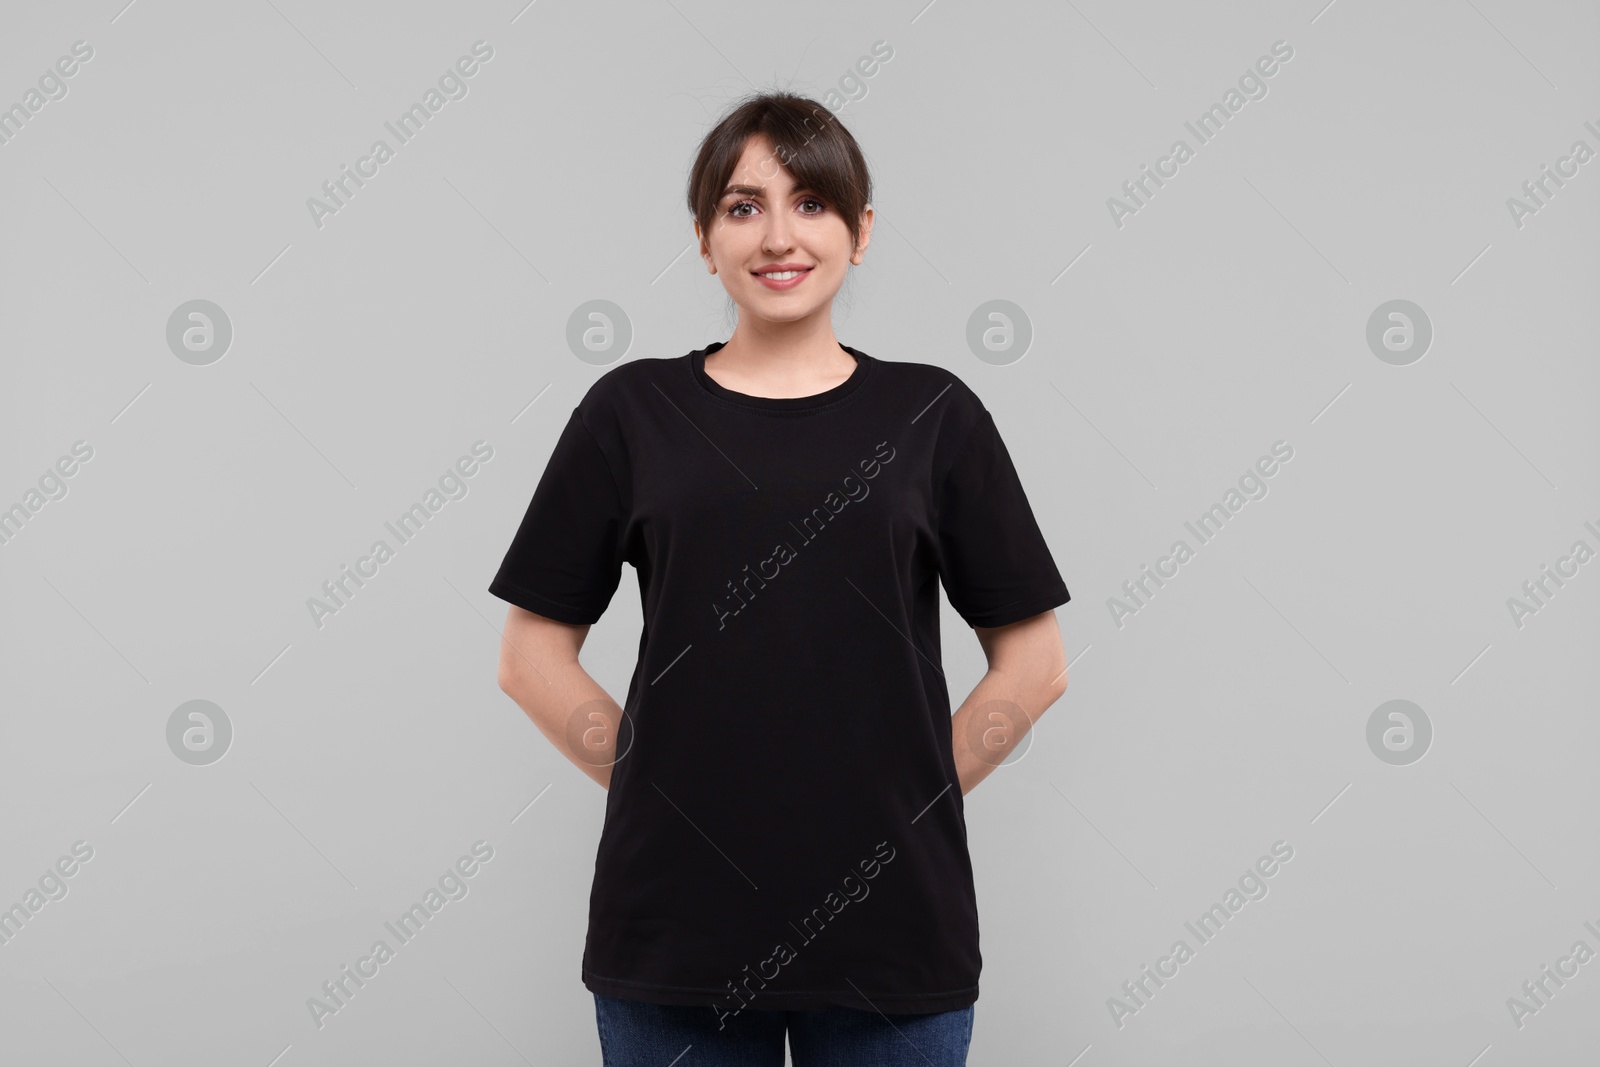 Photo of Smiling woman in stylish black t-shirt on light grey background